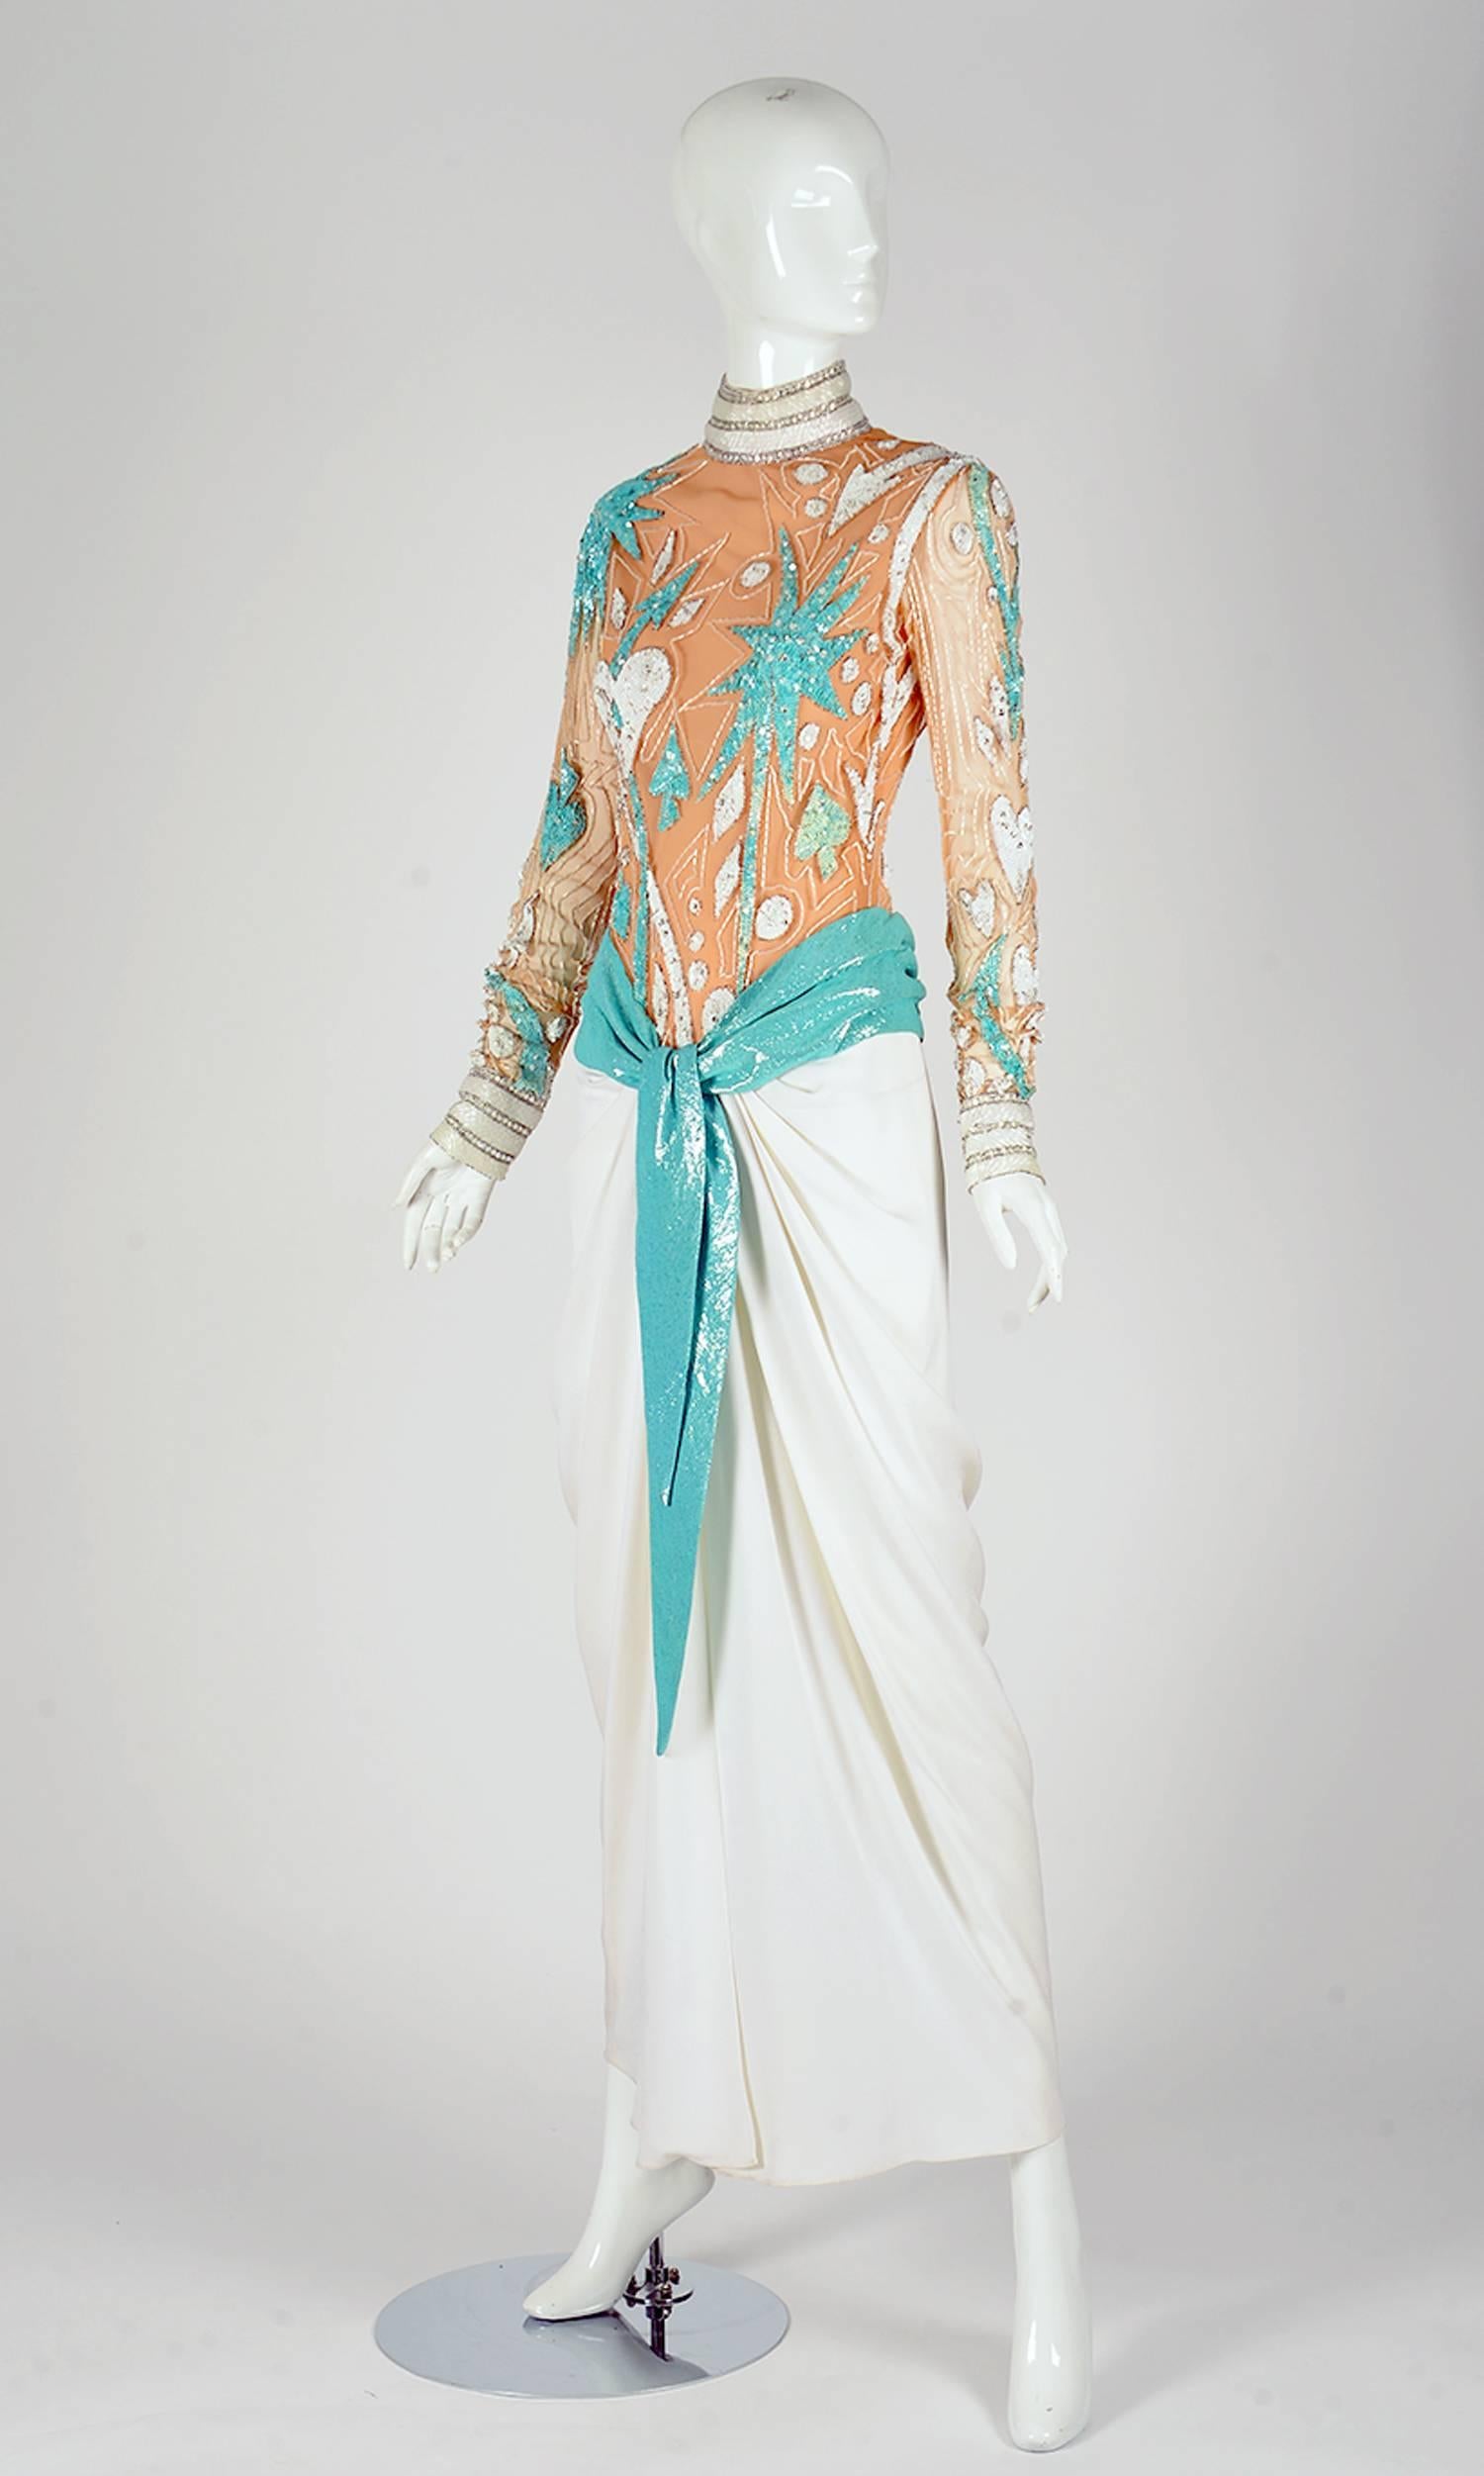 Vintage Bob Mackie gown. This fantastic 1980s floor length evening gown is turquoise blue, white, and has a nude mesh bodice with fantastic beaded details. The beading and sequins are turquoise blue and white, and create whimsical star and heart